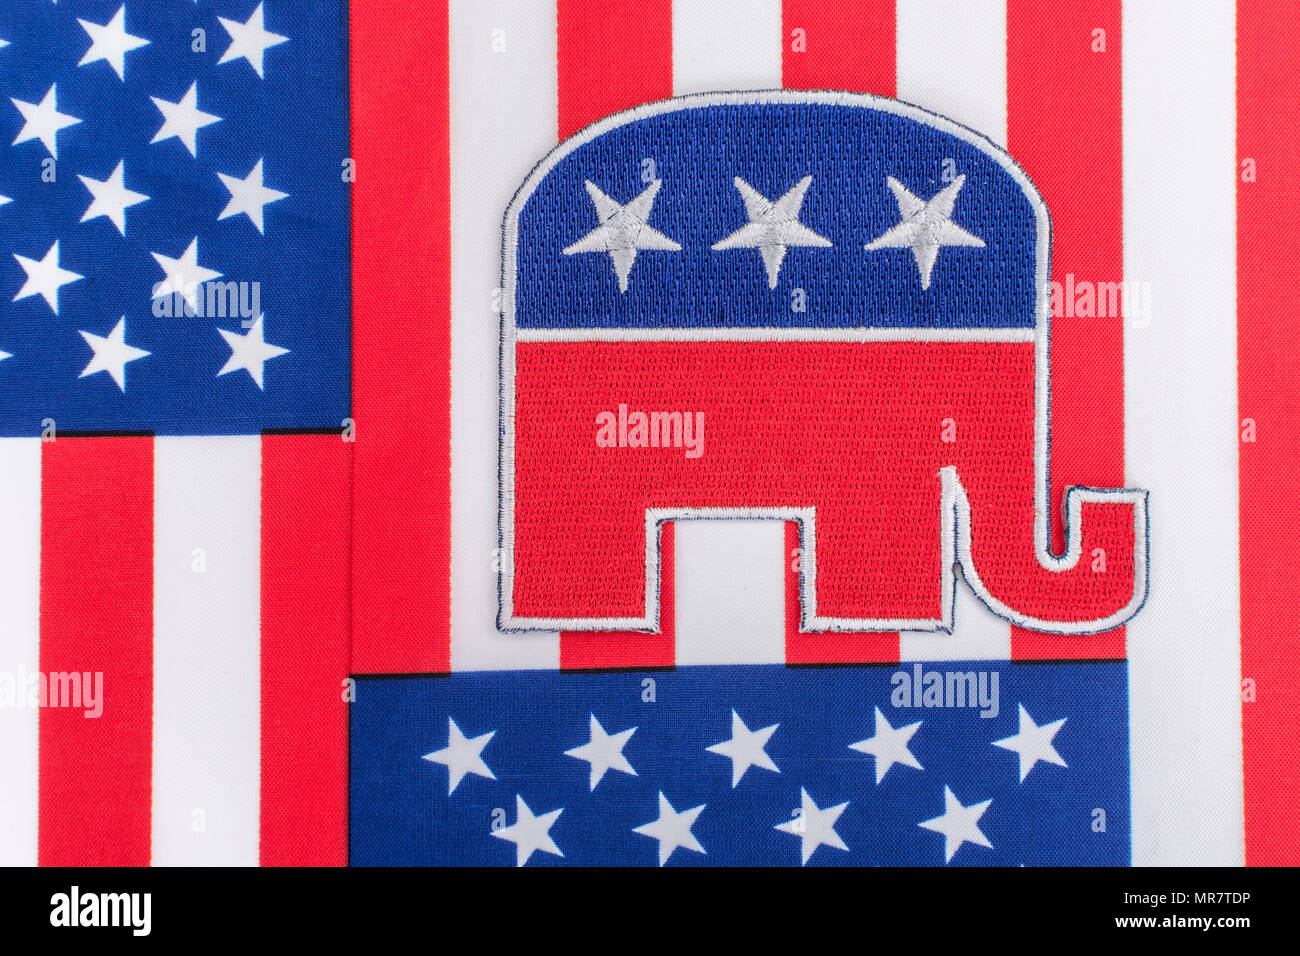 GOP / Republican Party patch with Stars & Stripes flag. For US Midterms, Presidential elections, US Primaries, US politics, Republicans 2024 red wave. Stock Photo